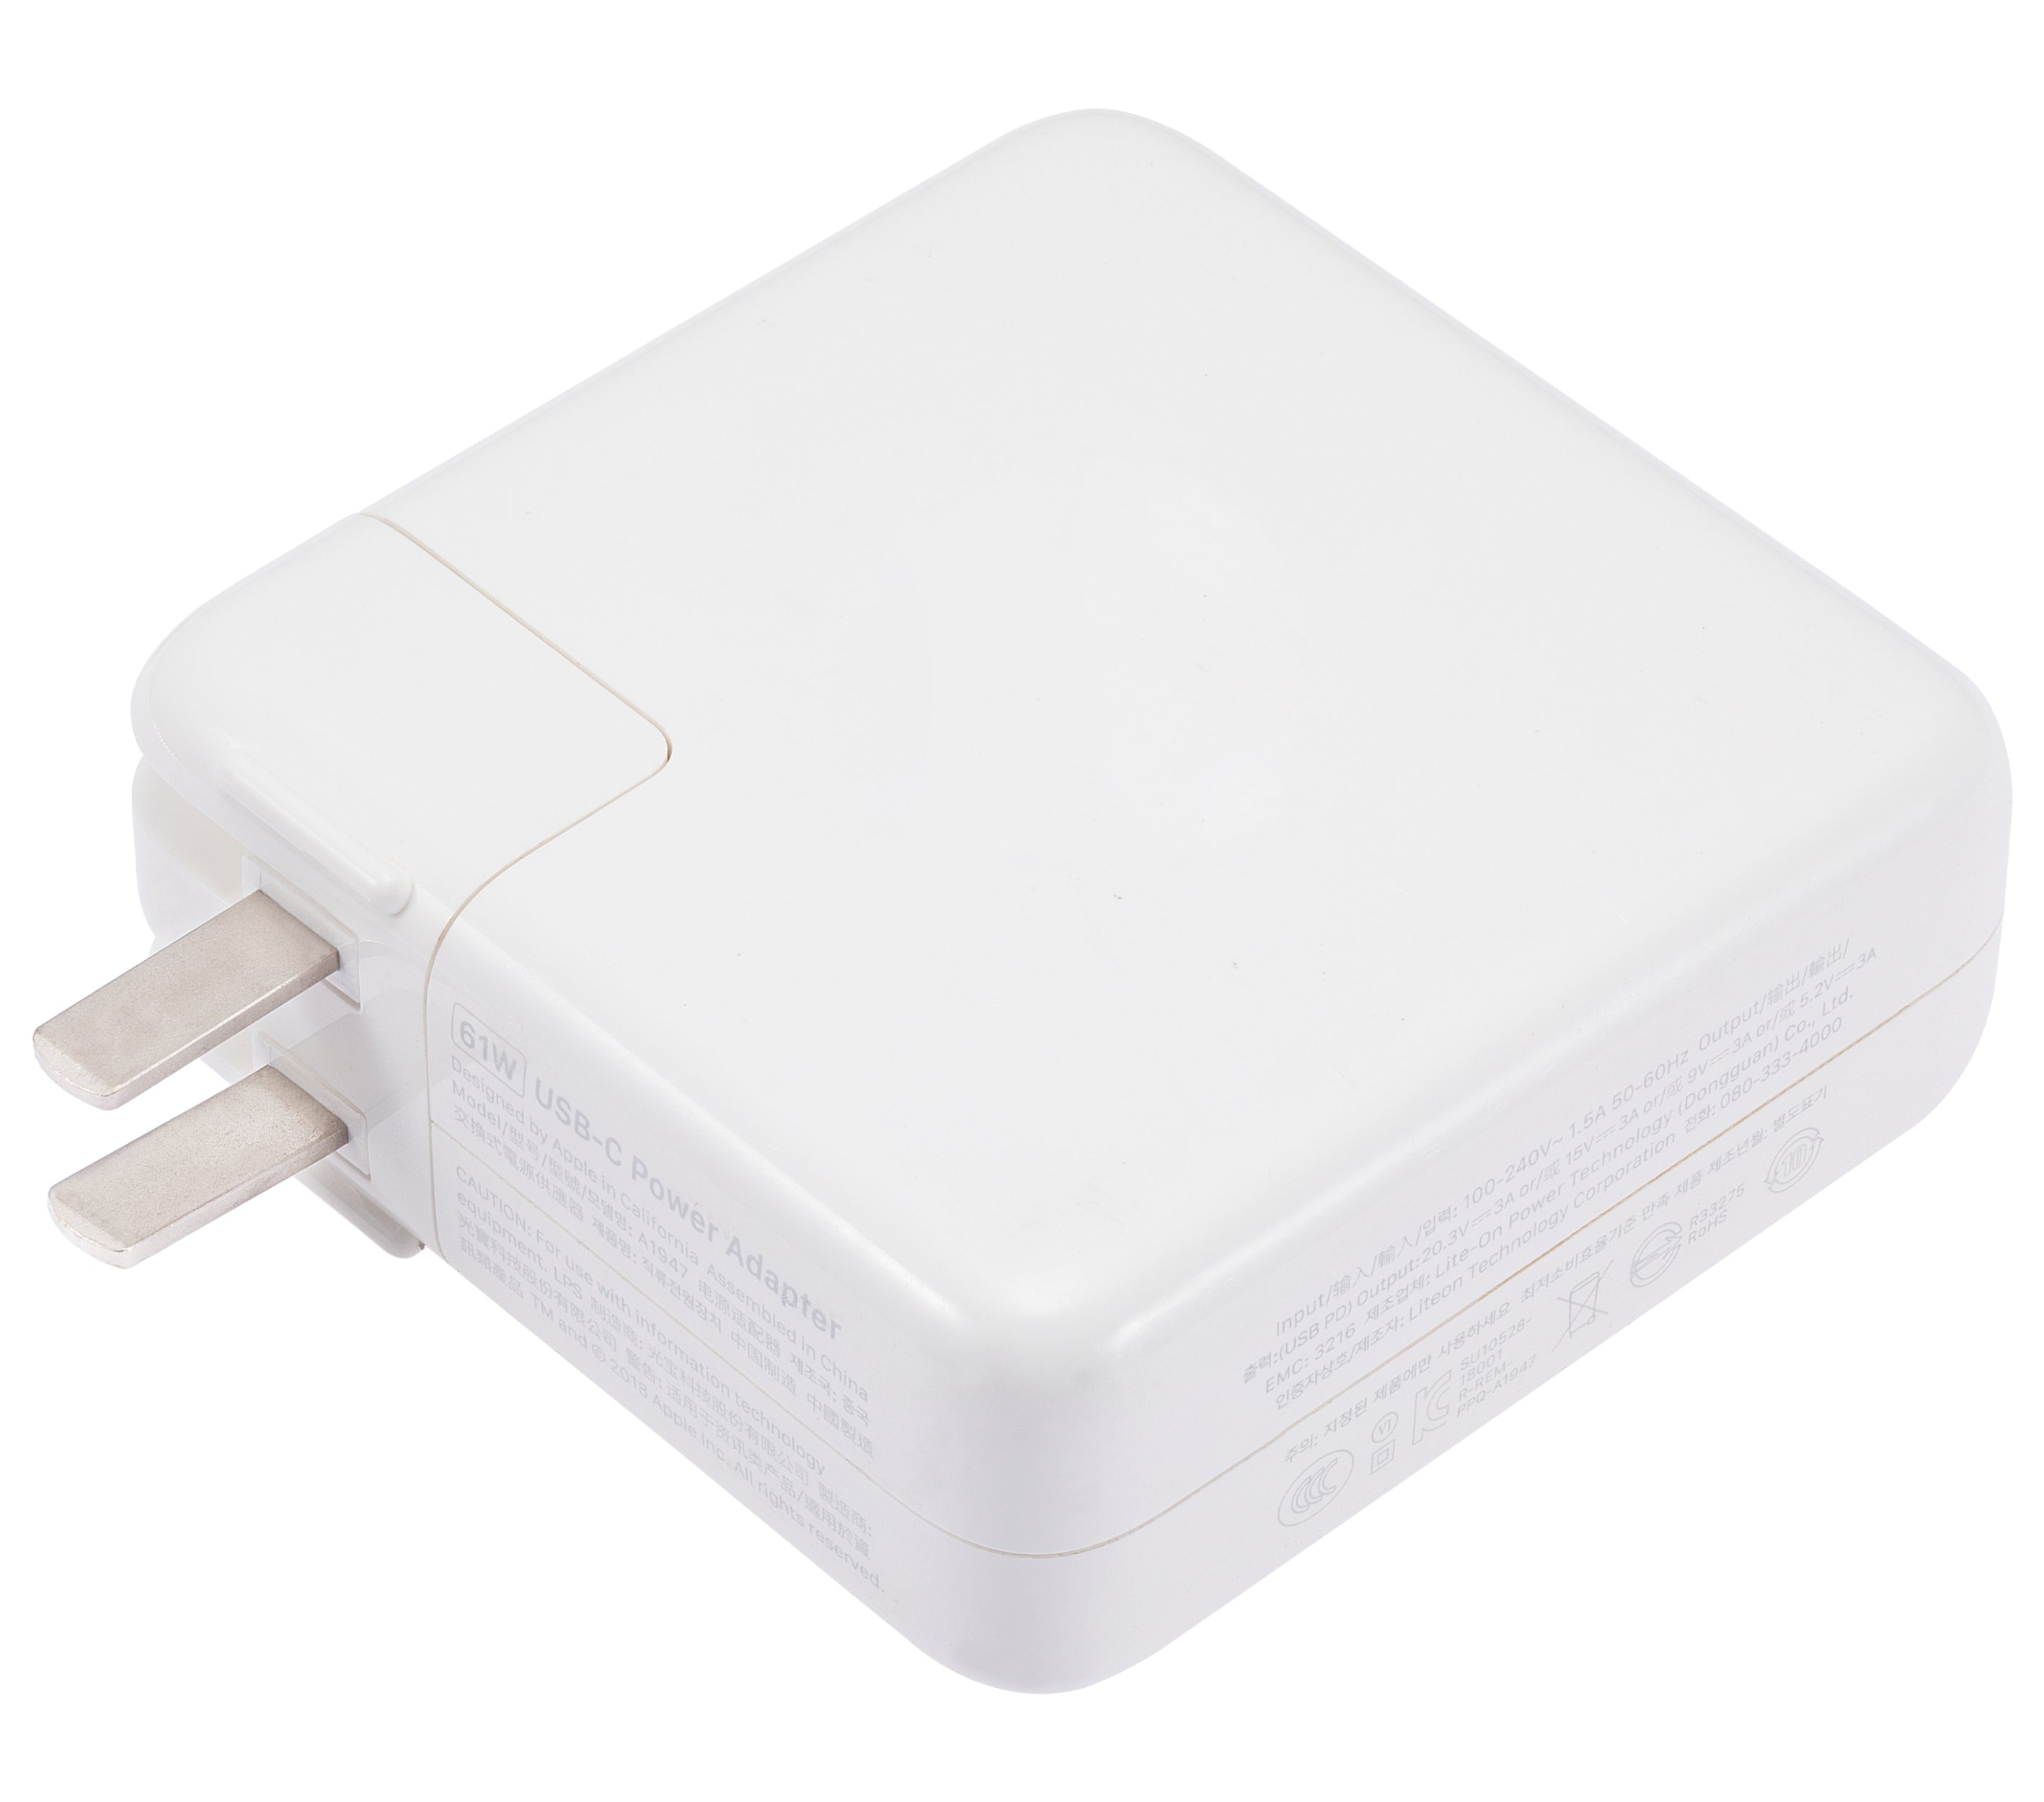 61W USB-C CHARGER POWER ADAPTER ONLY COMPATIBLE FOR MACBOOK (USED OEM PULL)